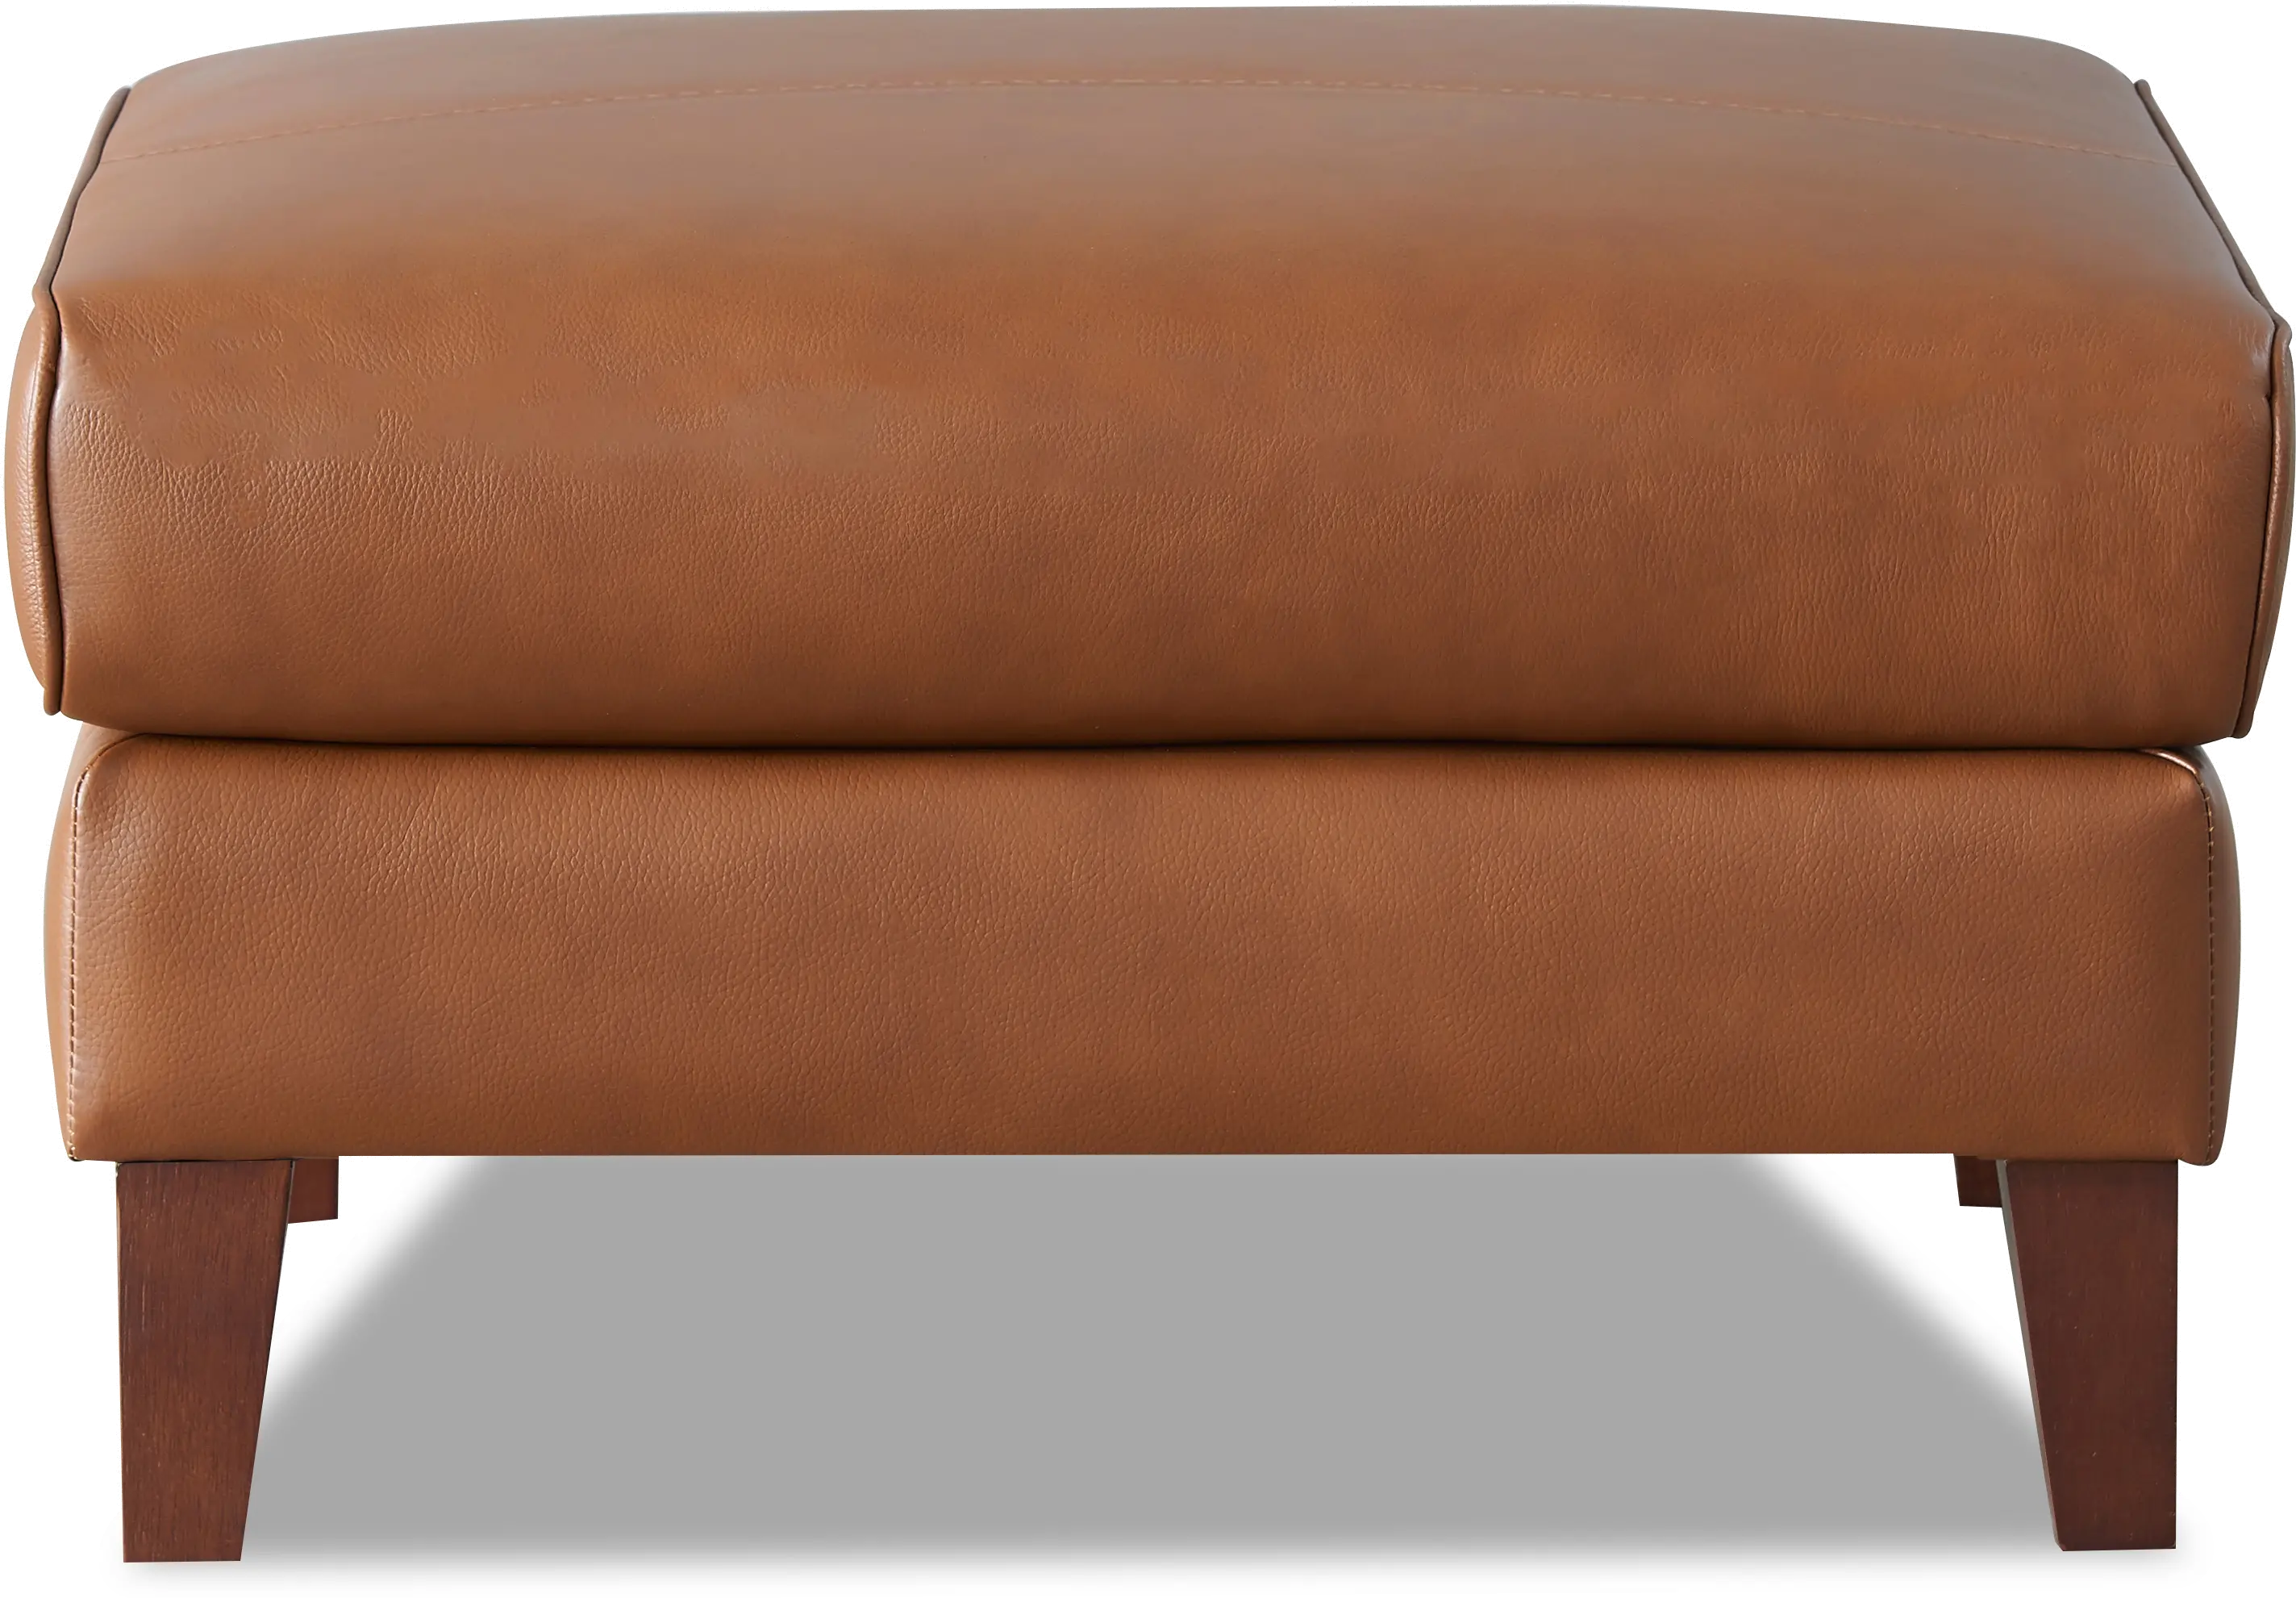 Pacer Nutmeg Top Grain Leather Ottoman - Amax Leather